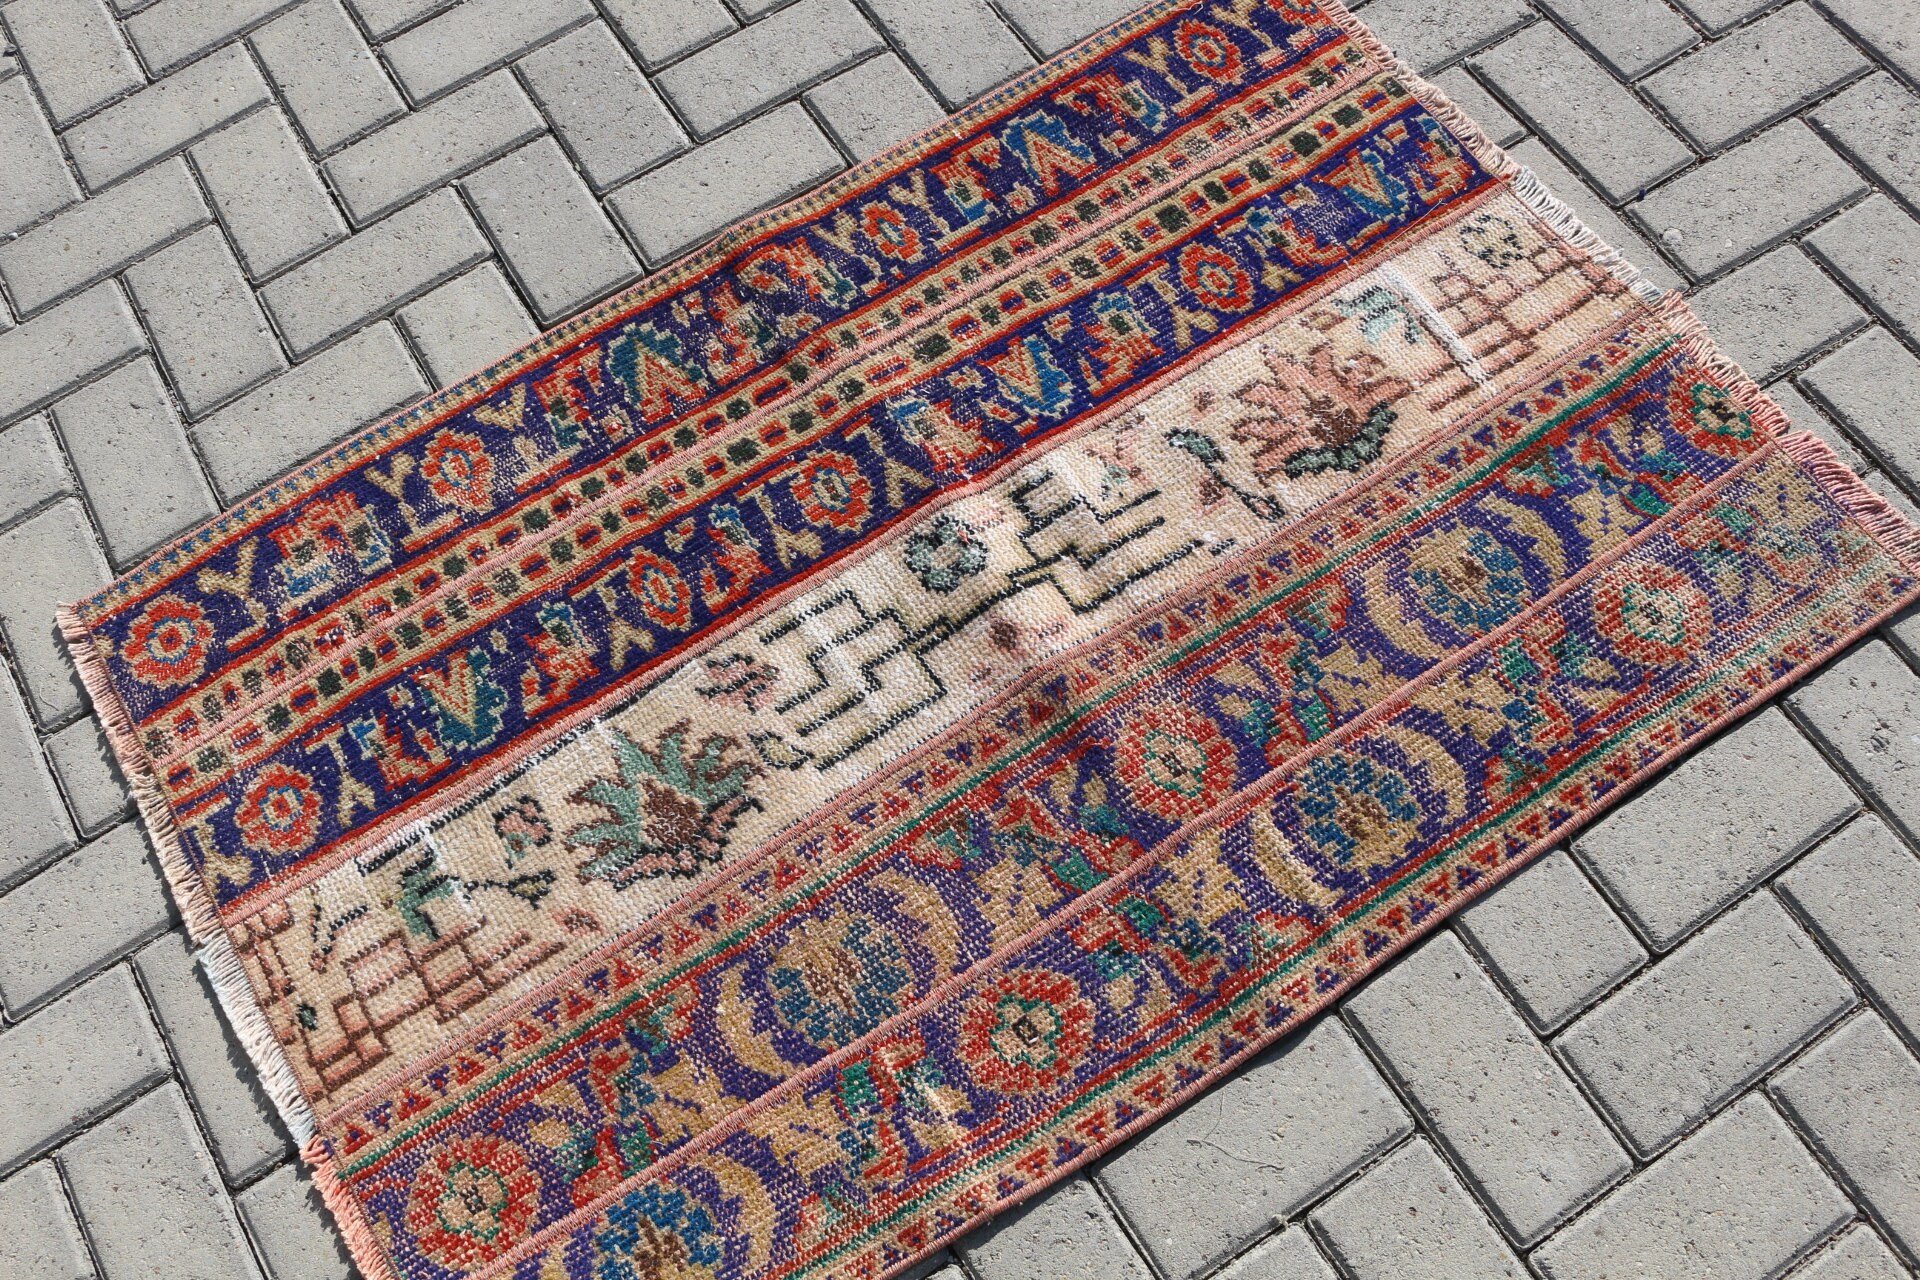 Turkish Rugs, Blue  2.6x3.9 ft Small Rugs, Bathroom Rug, Entry Rug, Kitchen Rug, Vintage Rugs, Rugs for Bath, Oushak Rugs